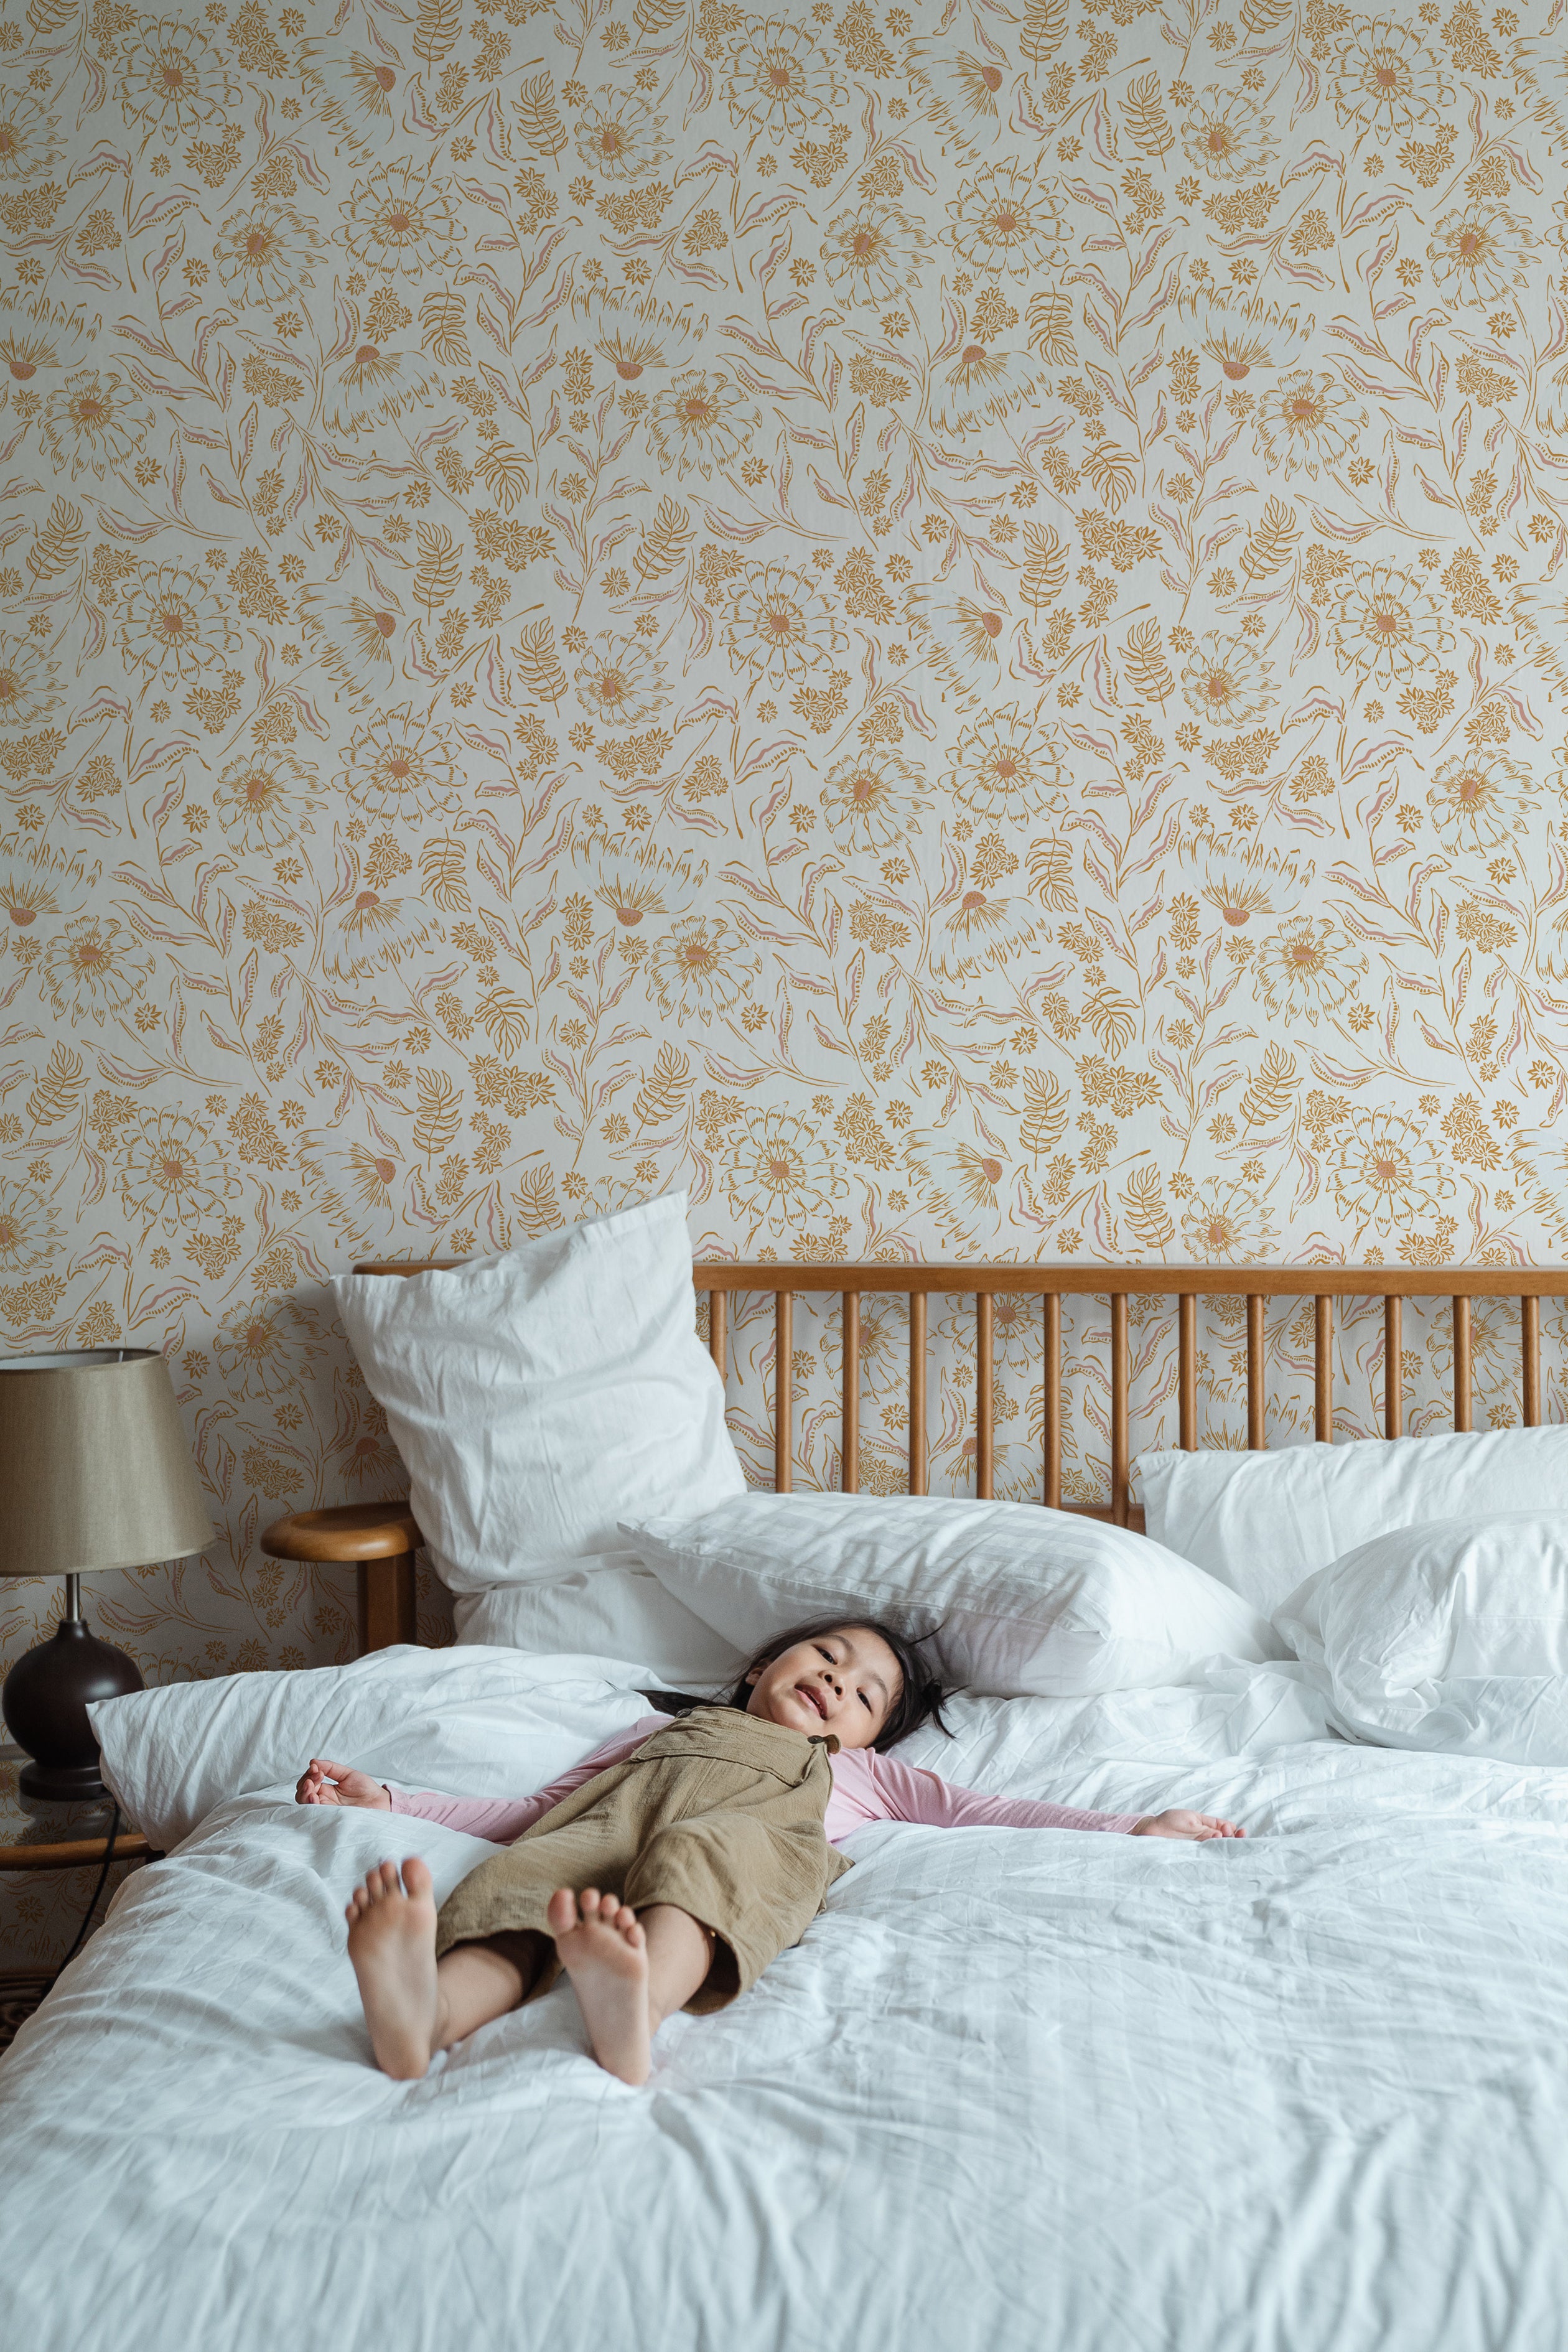 A young child lies relaxed on a large bed in a bedroom adorned with De Pijp Floral Wallpaper. The wallpaper showcases a soft golden floral design on a cream background, creating a serene and cheerful atmosphere. The room is furnished with a wooden bed and a vintage bedside lamp.